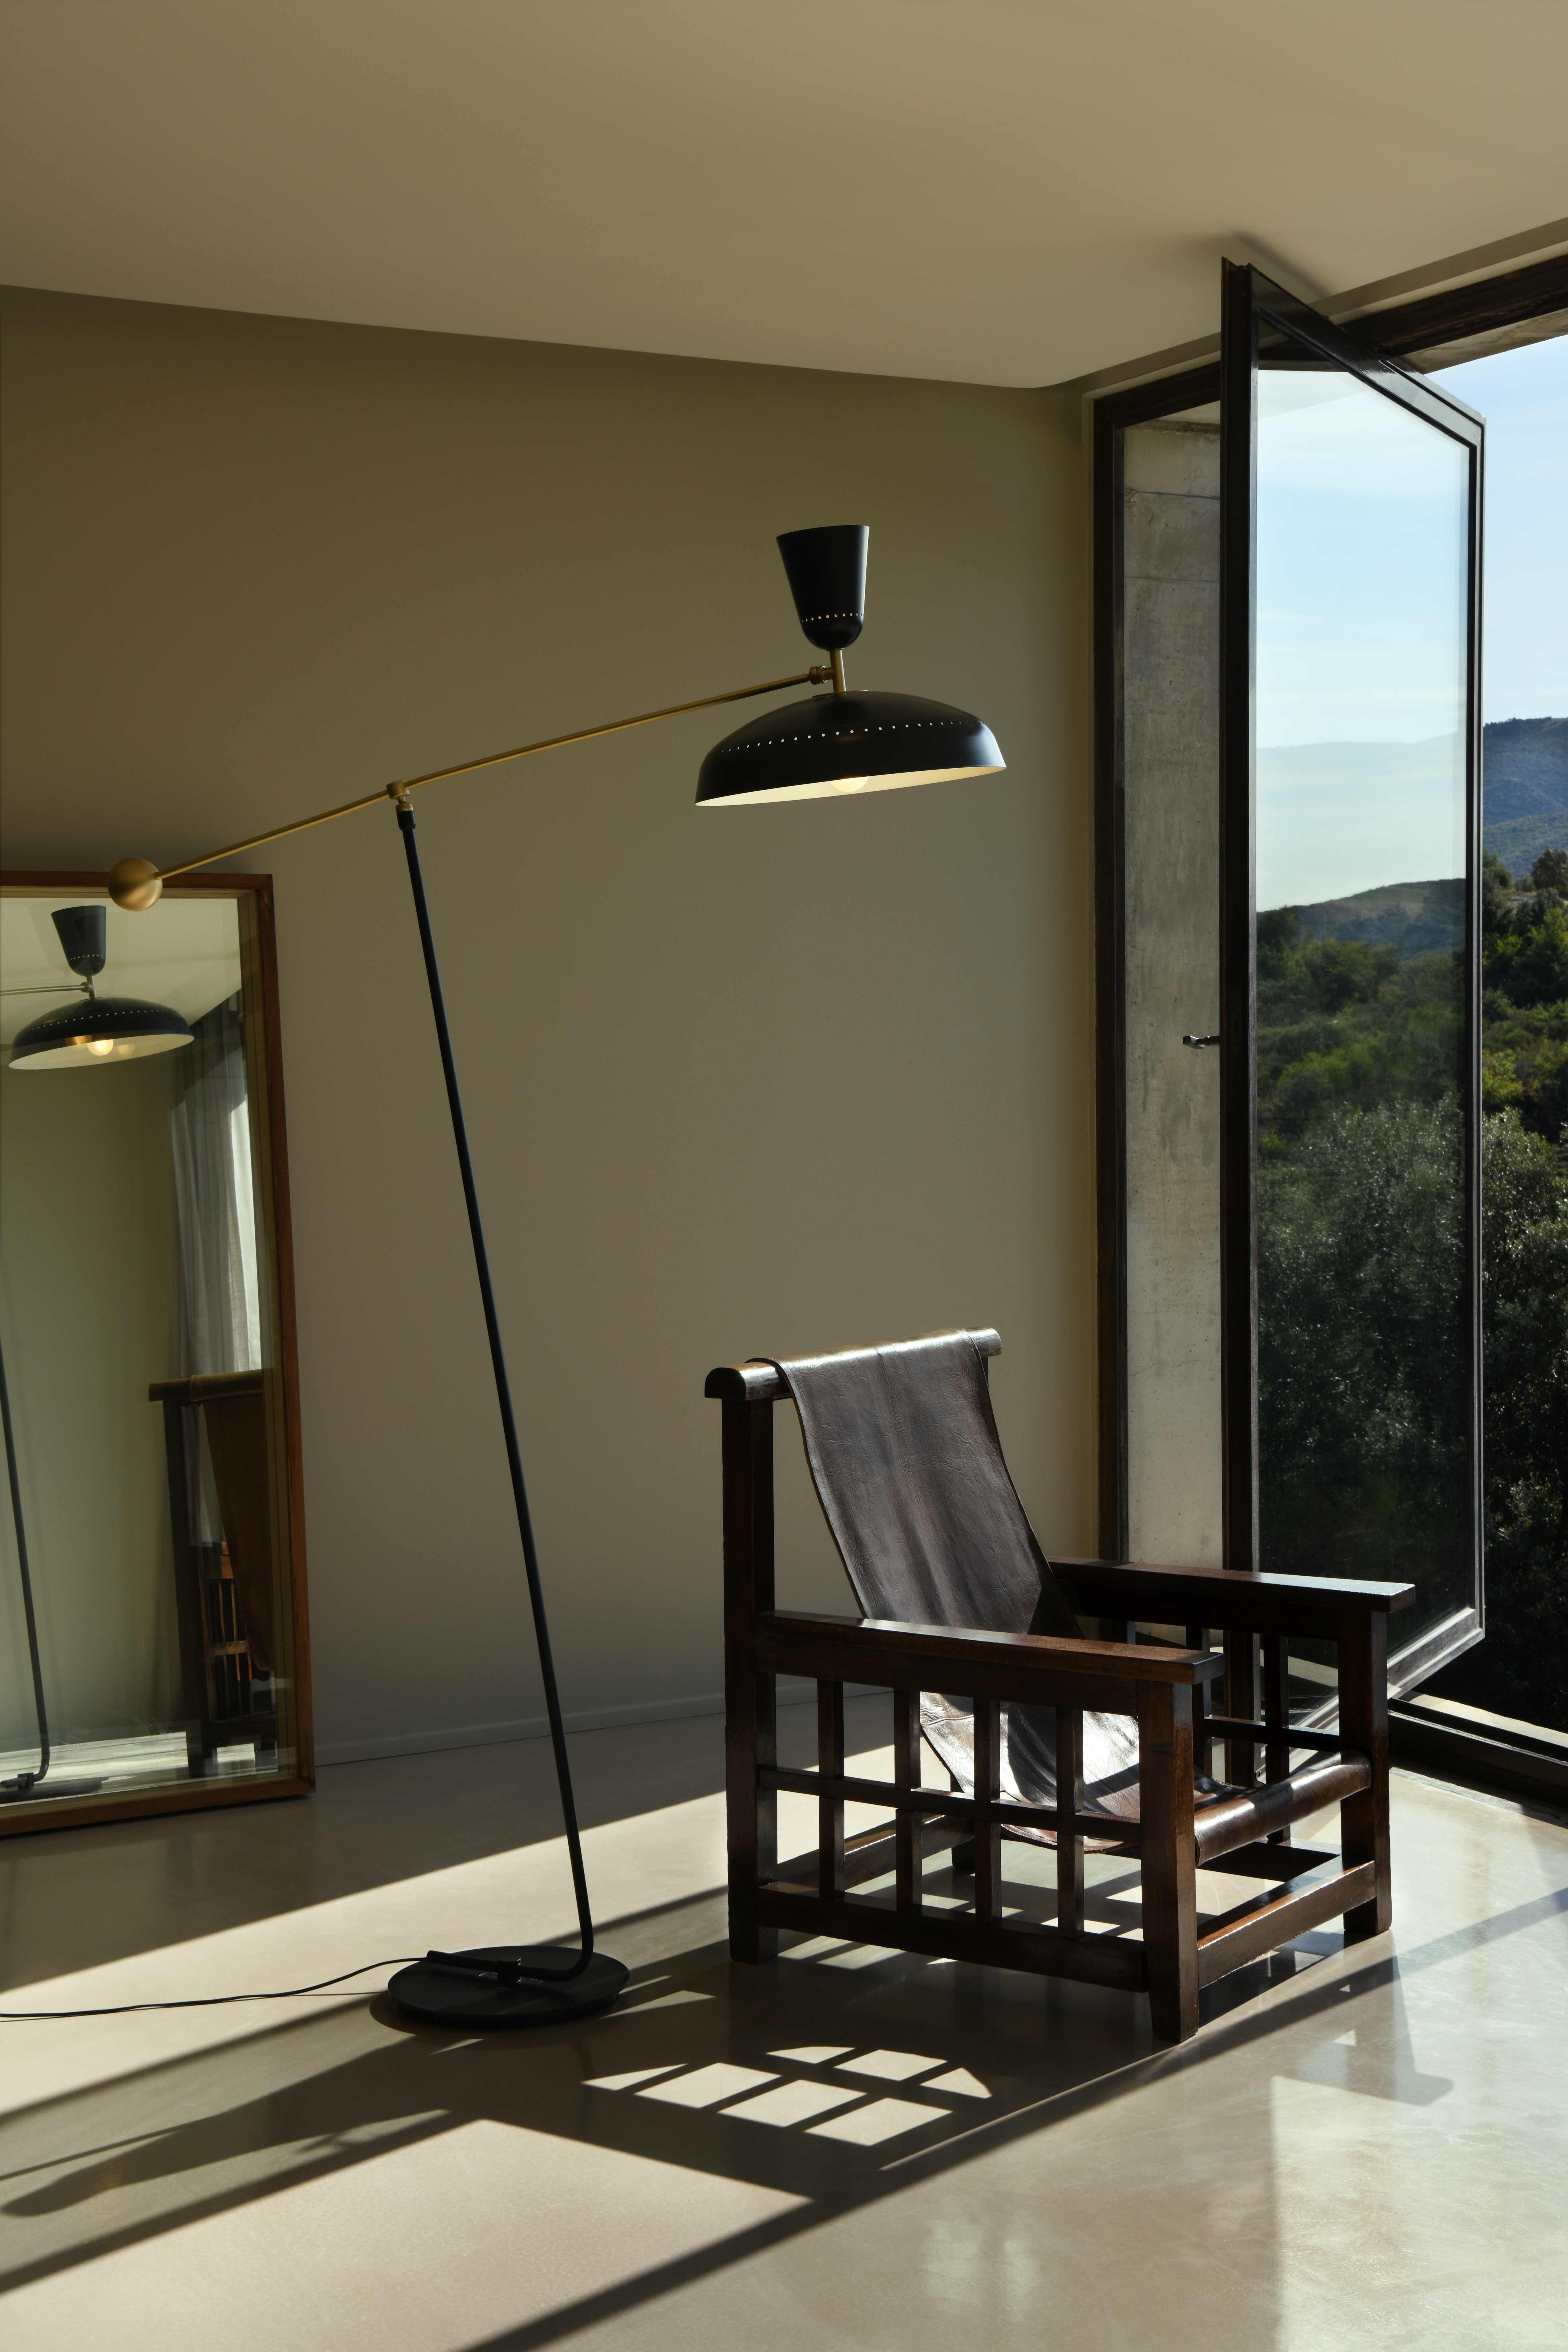 Large Pierre Guariche 'G1' floor lamp for Sammode studio in black. 

Originally designed by Pierre Guariche in 1951, this iconic floor lamp is newly produced in an authorized re-edition by Sammode Studio in France embracing many of the same